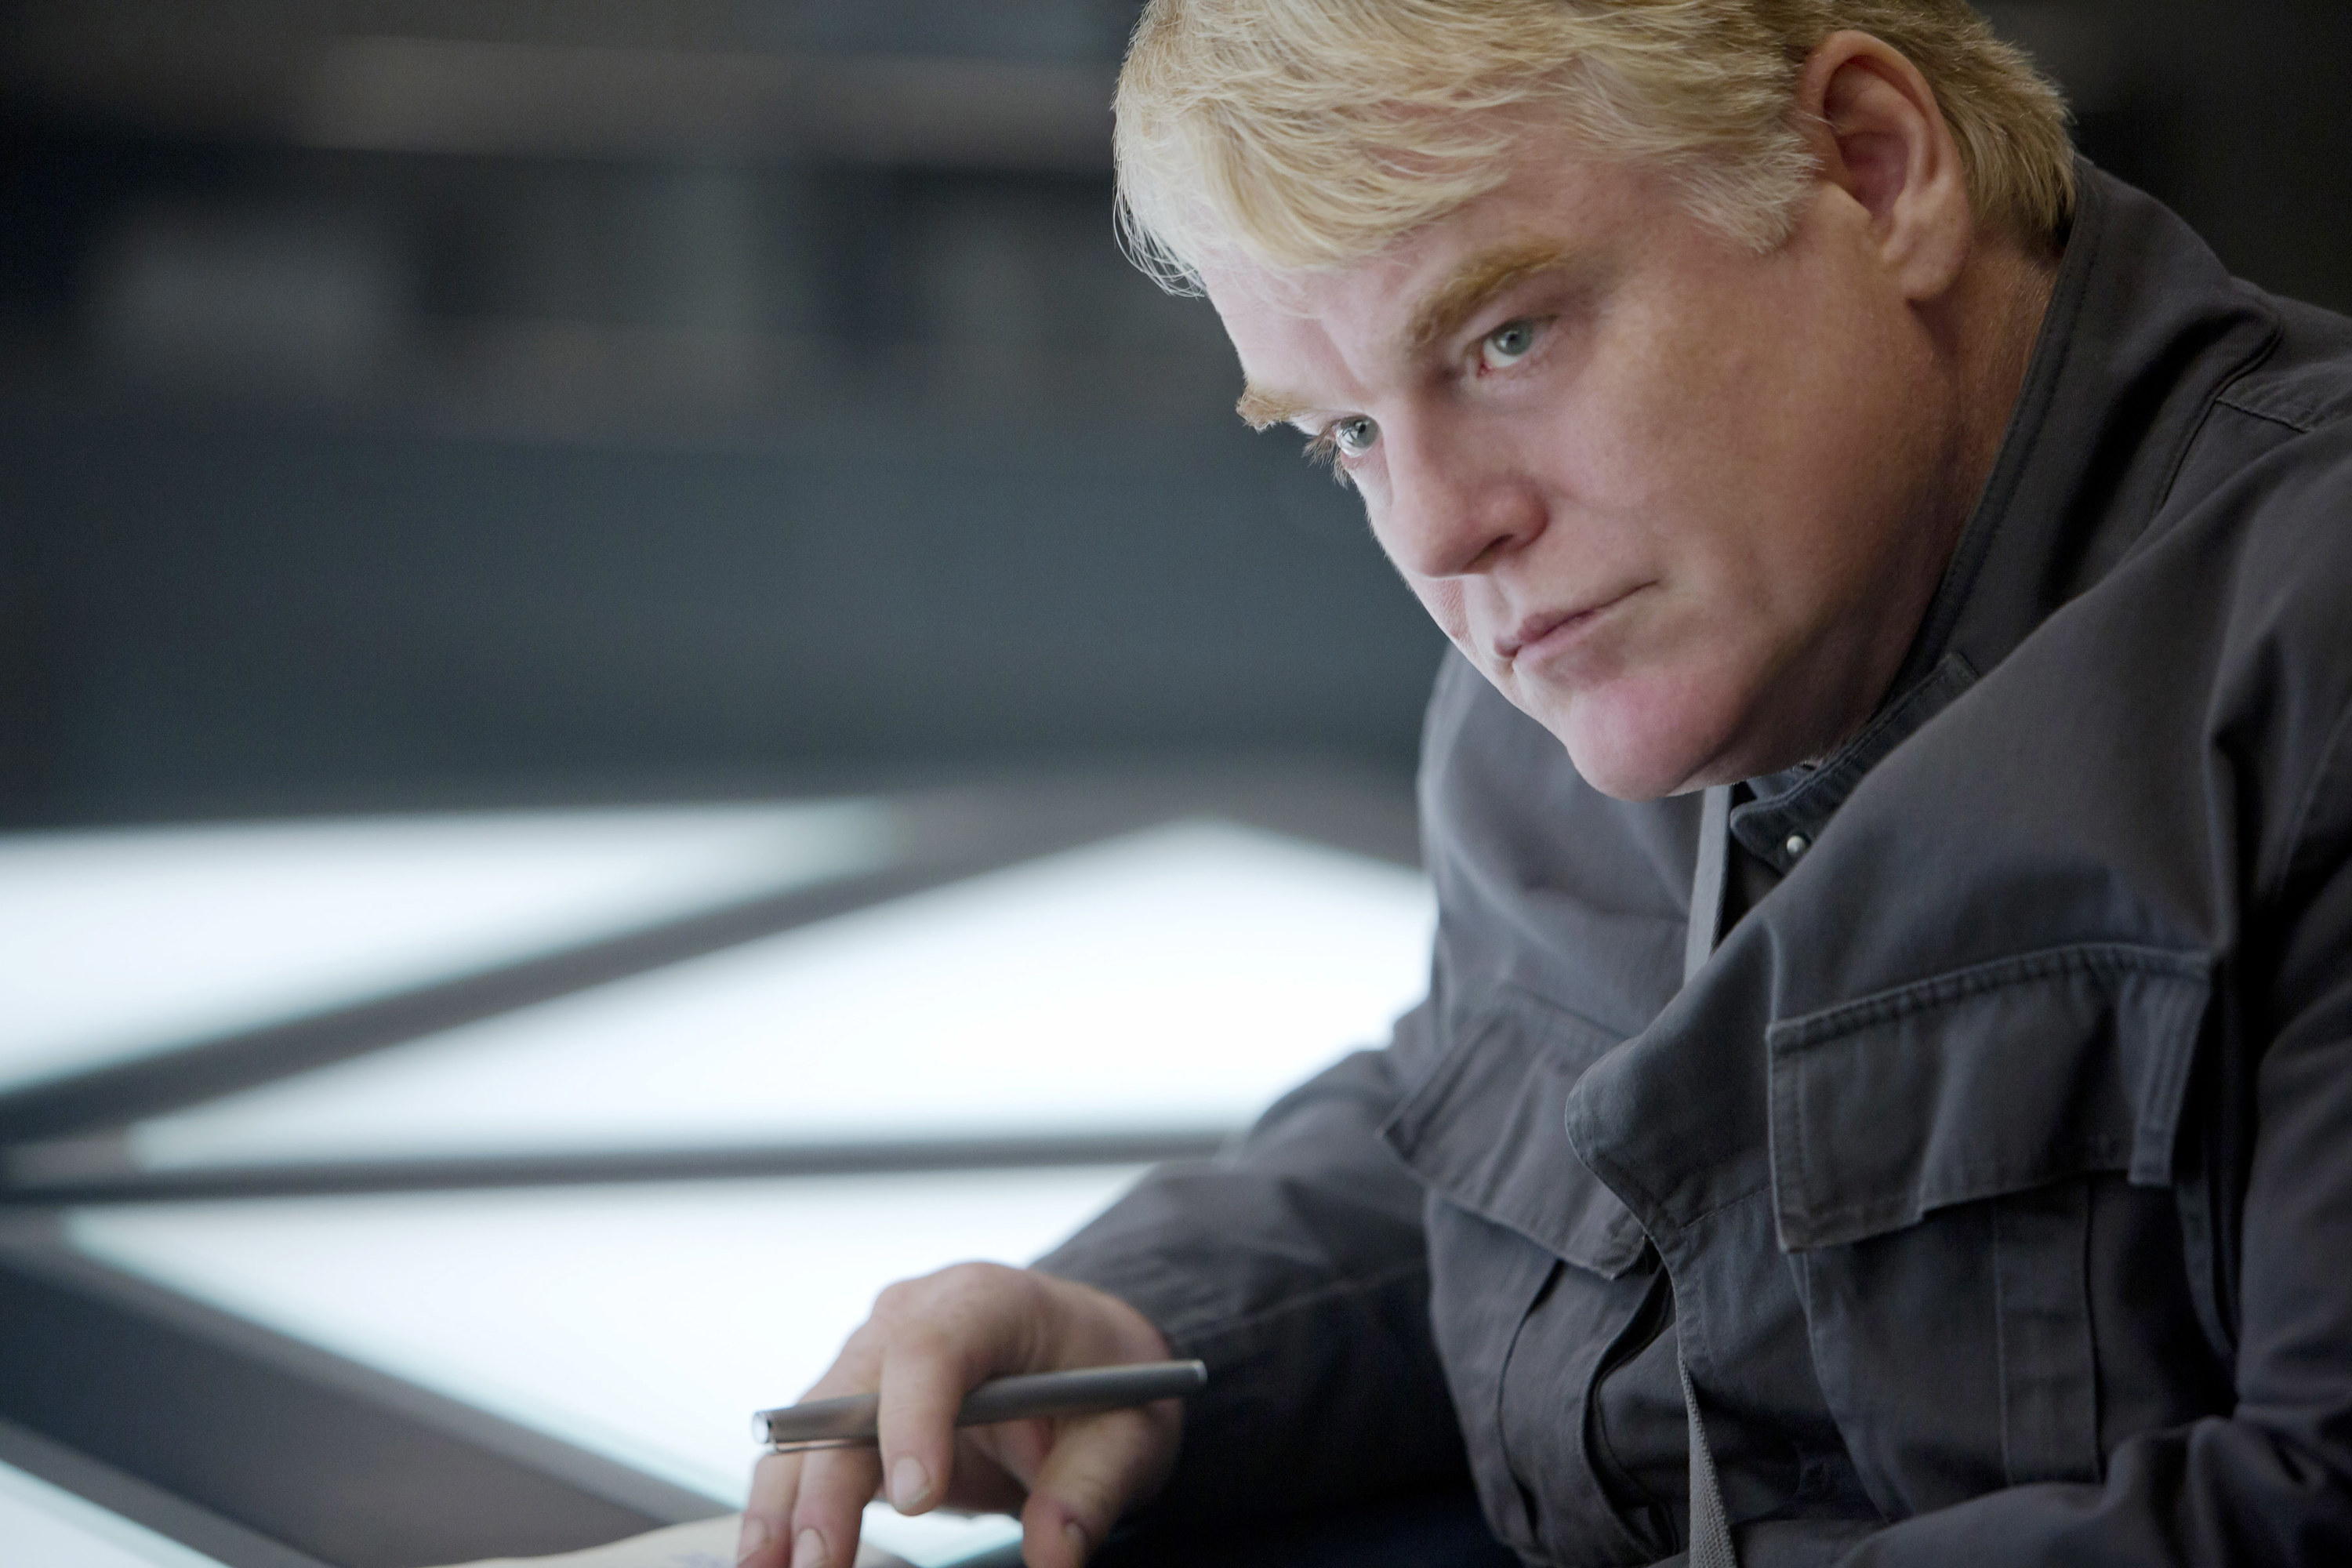 Philip as Plutarch Heavensbee looks serious